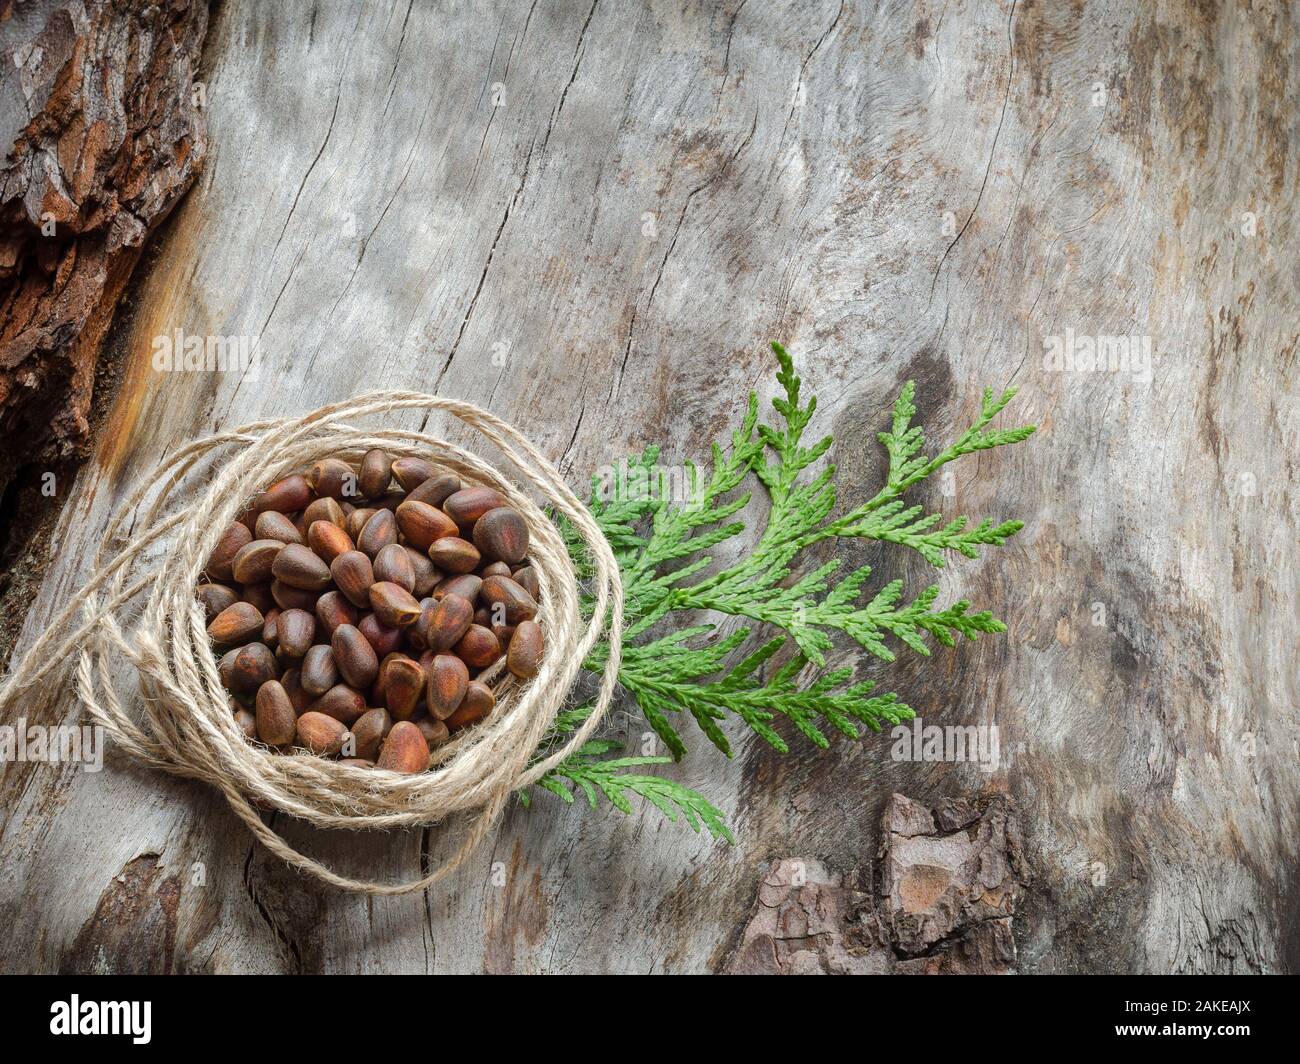 Unshelled pine nuts on aged wood. Closeup Stock Photo